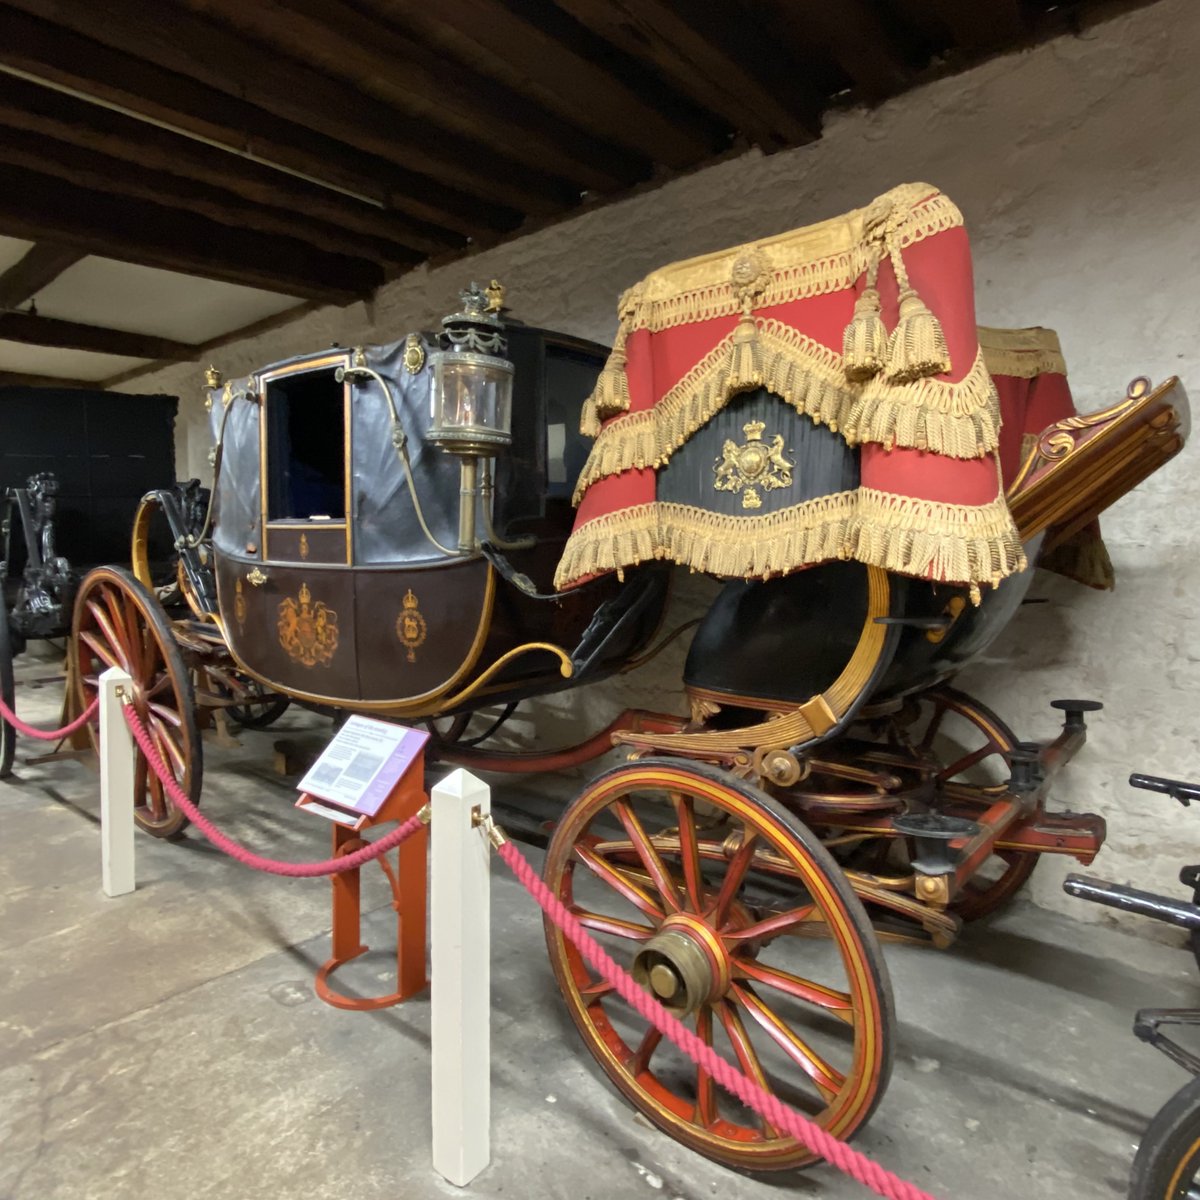 This week's mystery object is from the carriage museum! Can anyone guess which family this carriage belonged to? Hint: check the insignia! Let us know your answer in the comments below and if you've ever been to the Carriage Museum before? #MaidstoneMuseum #MysteryObject